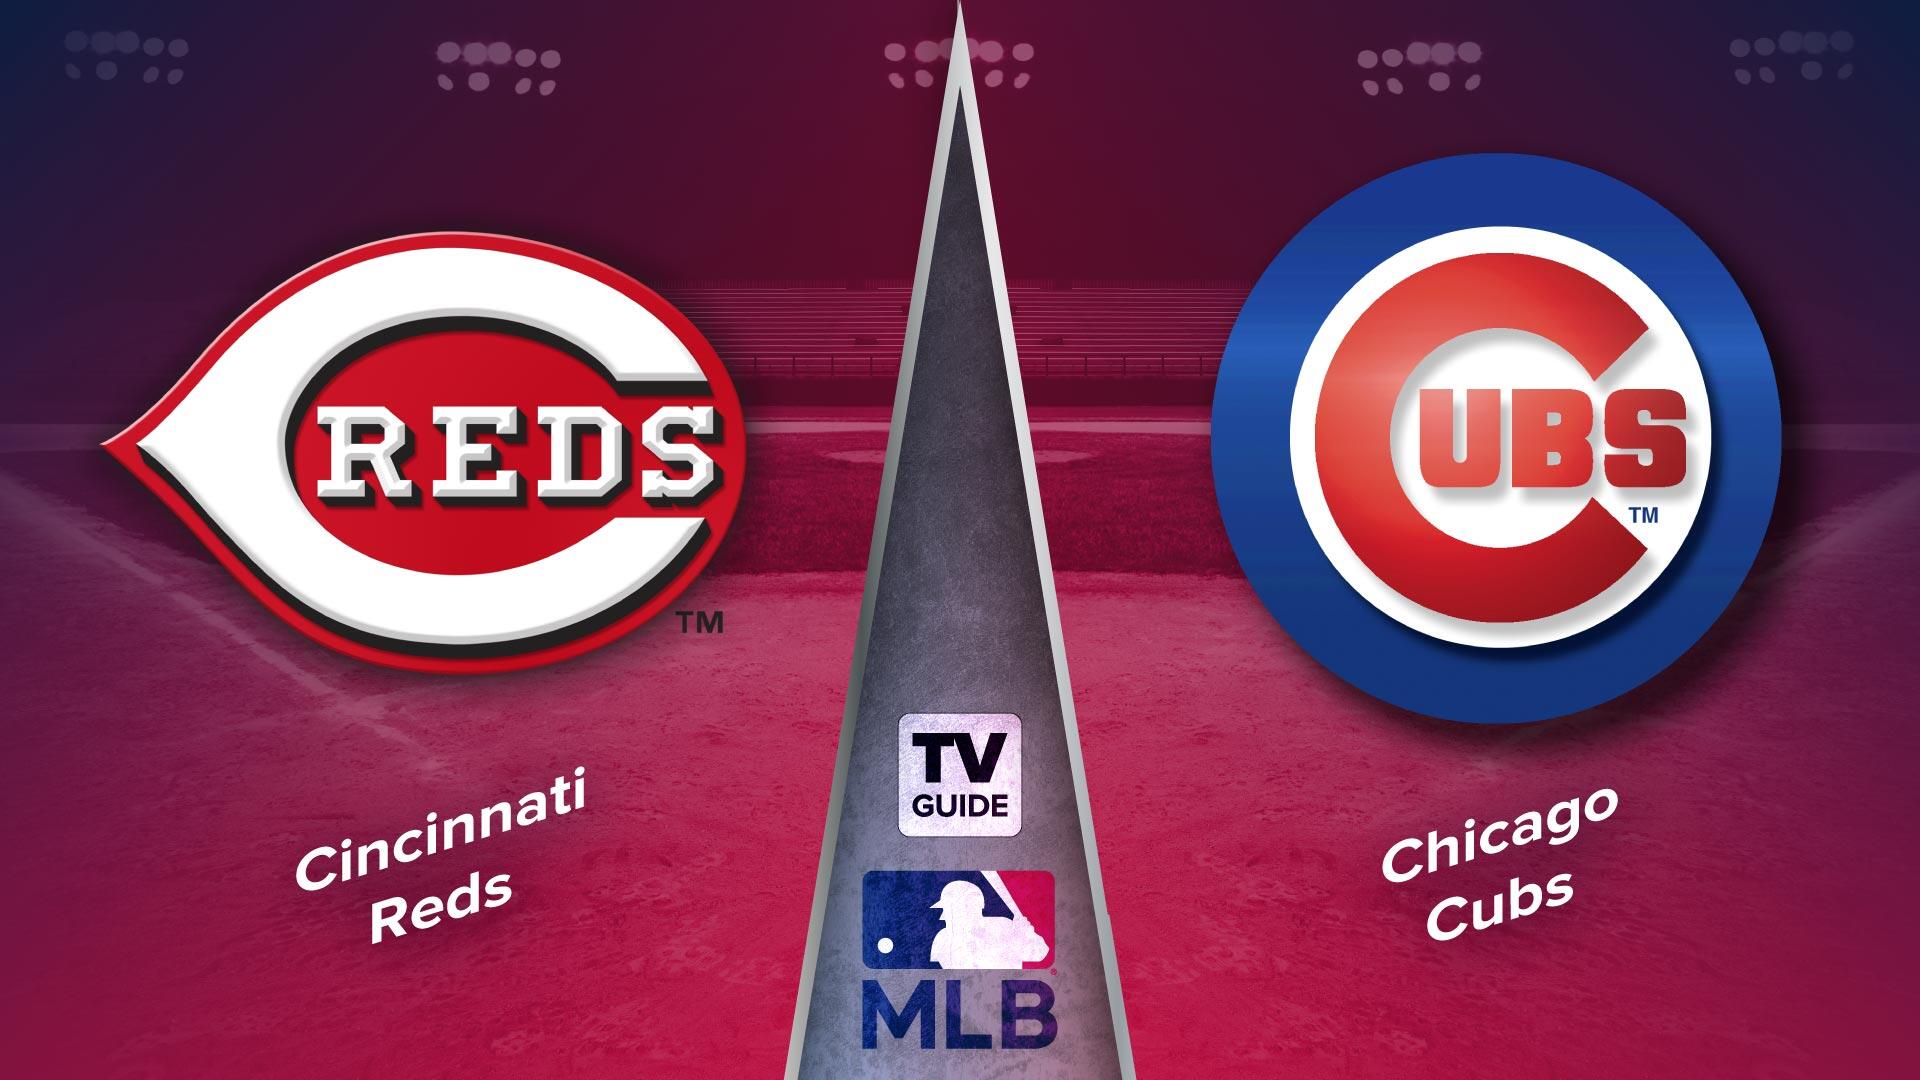 How to Watch Cincinnati Reds vs. Chicago Cubs Live on Oct 2 - TV Guide